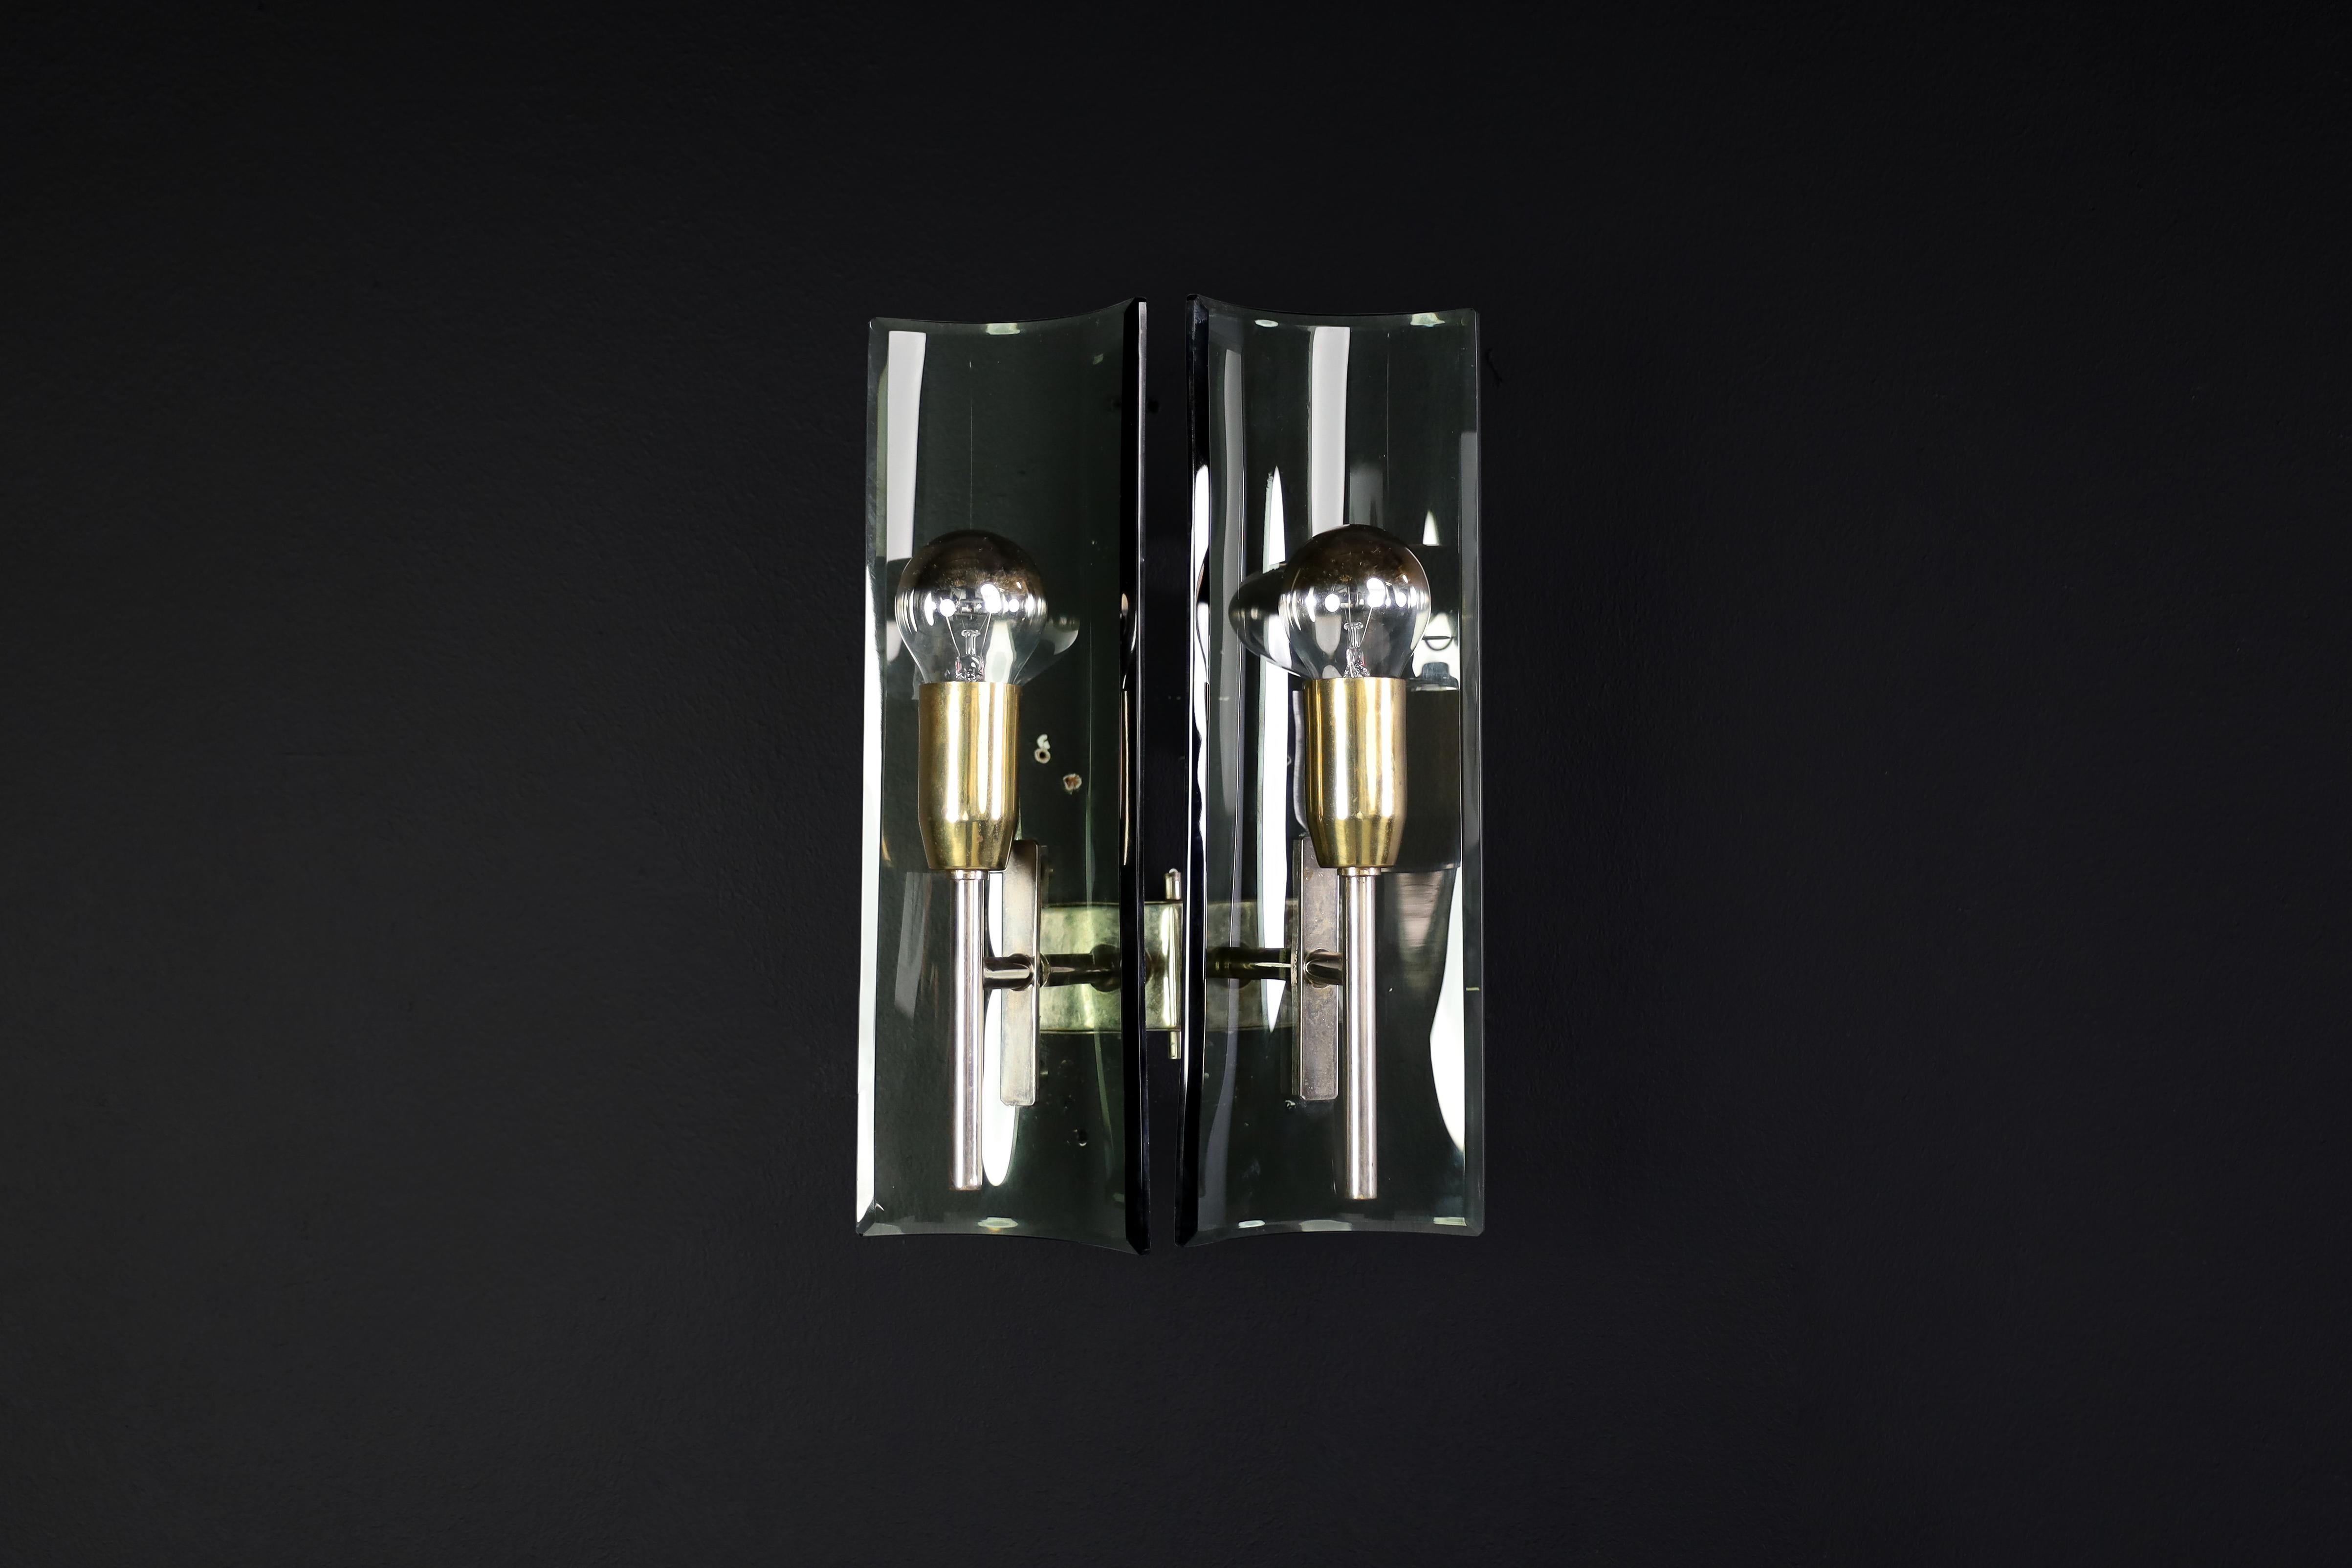 Set of Six Gino Paroldo Sconces in Brass and Curved Glass, Italy 1950s

Italian designer Gino Paroldo created a set of six sconces made of brass and glass in the 1950s. These wall lights are an excellent representation of Paroldo's style. The brass